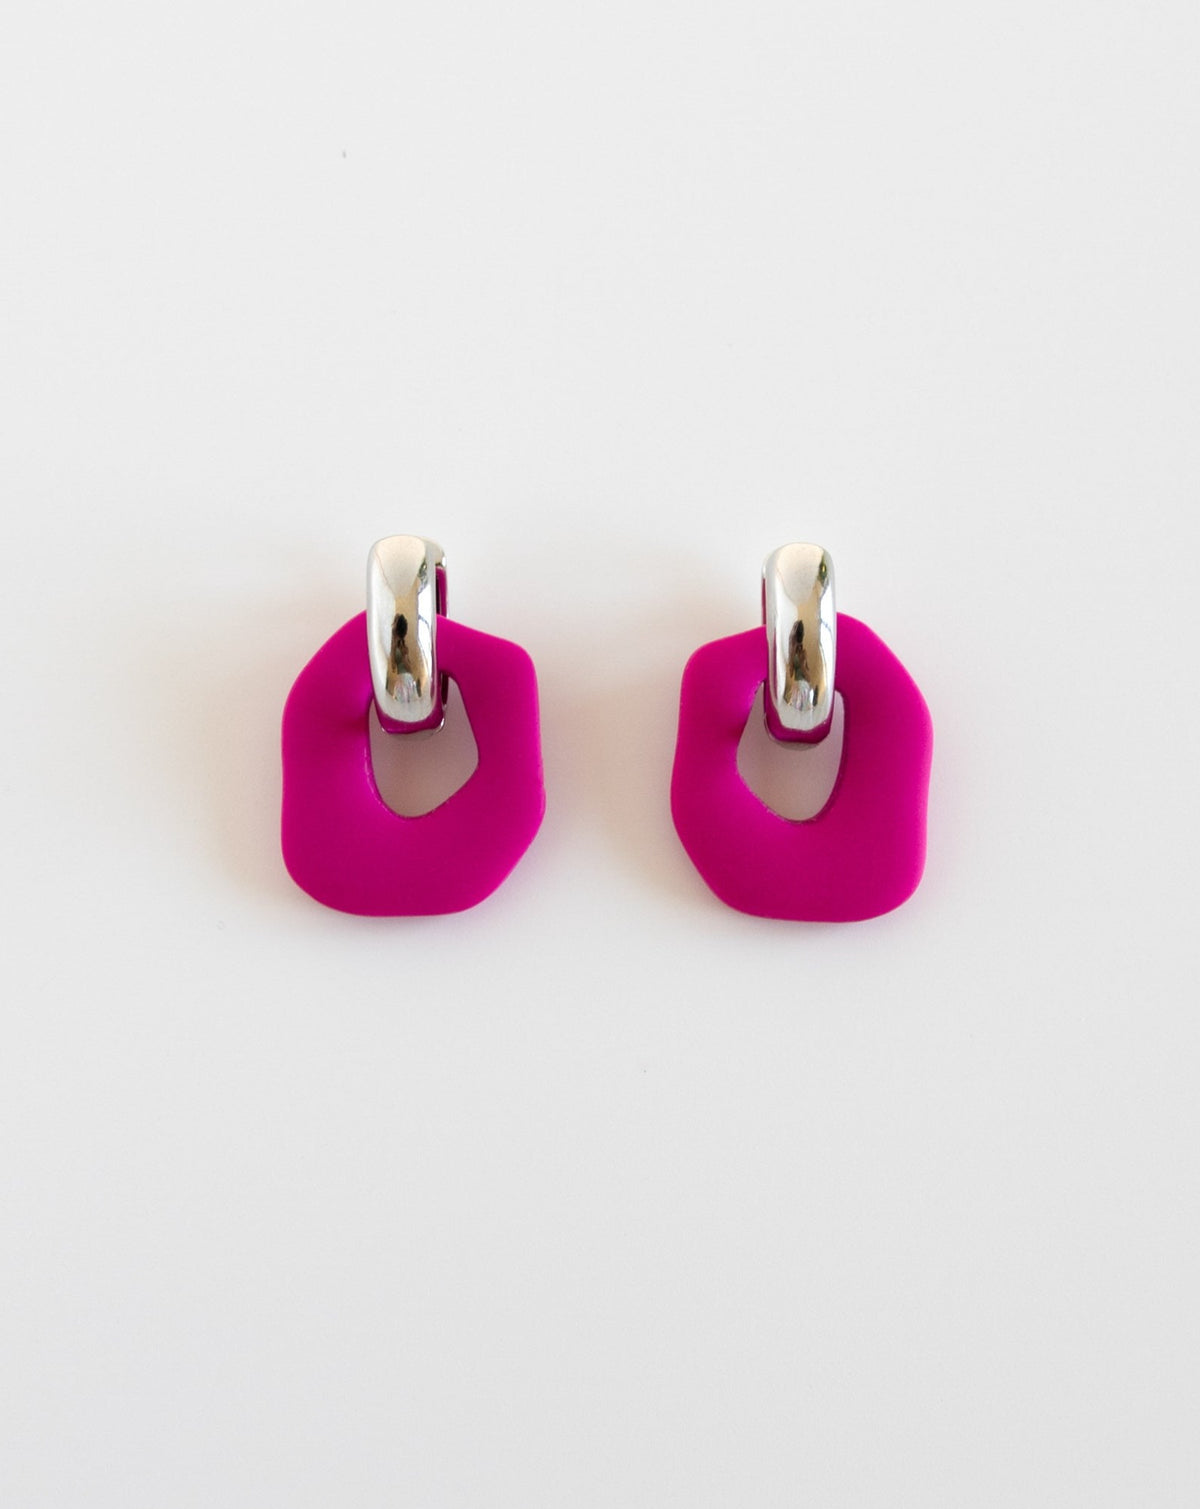 Darien earrings in Fuchsia color with silver hoops, front view